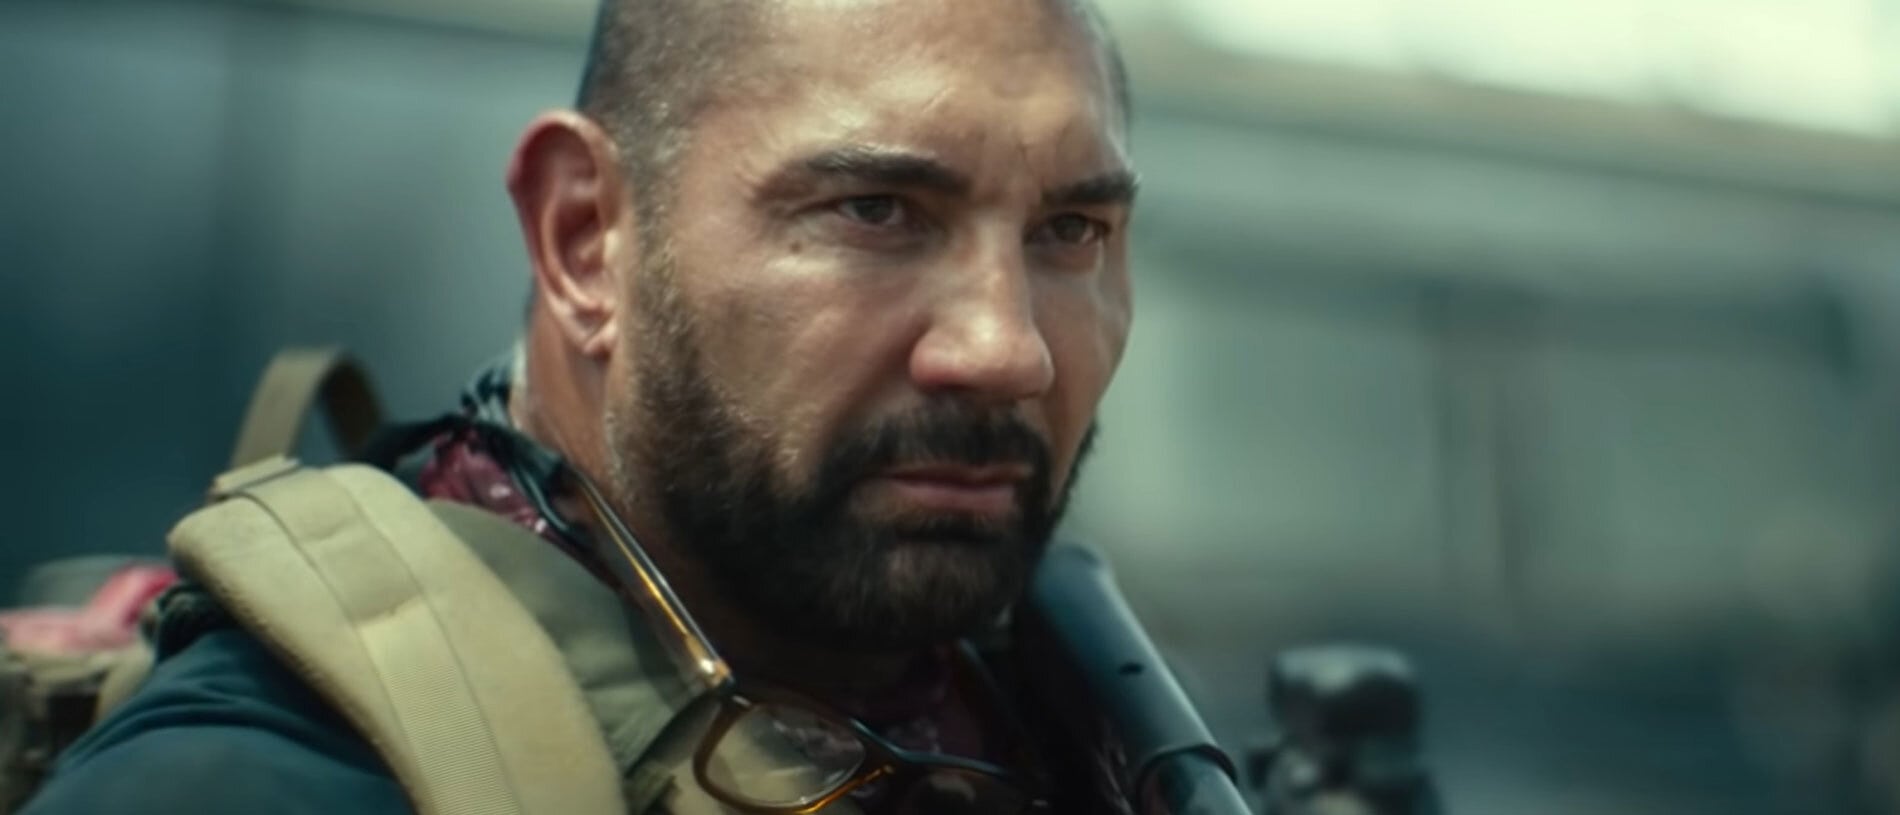 Dave-Bautista-Army-Of-The-Dead-Zack-Snyder-Netflix